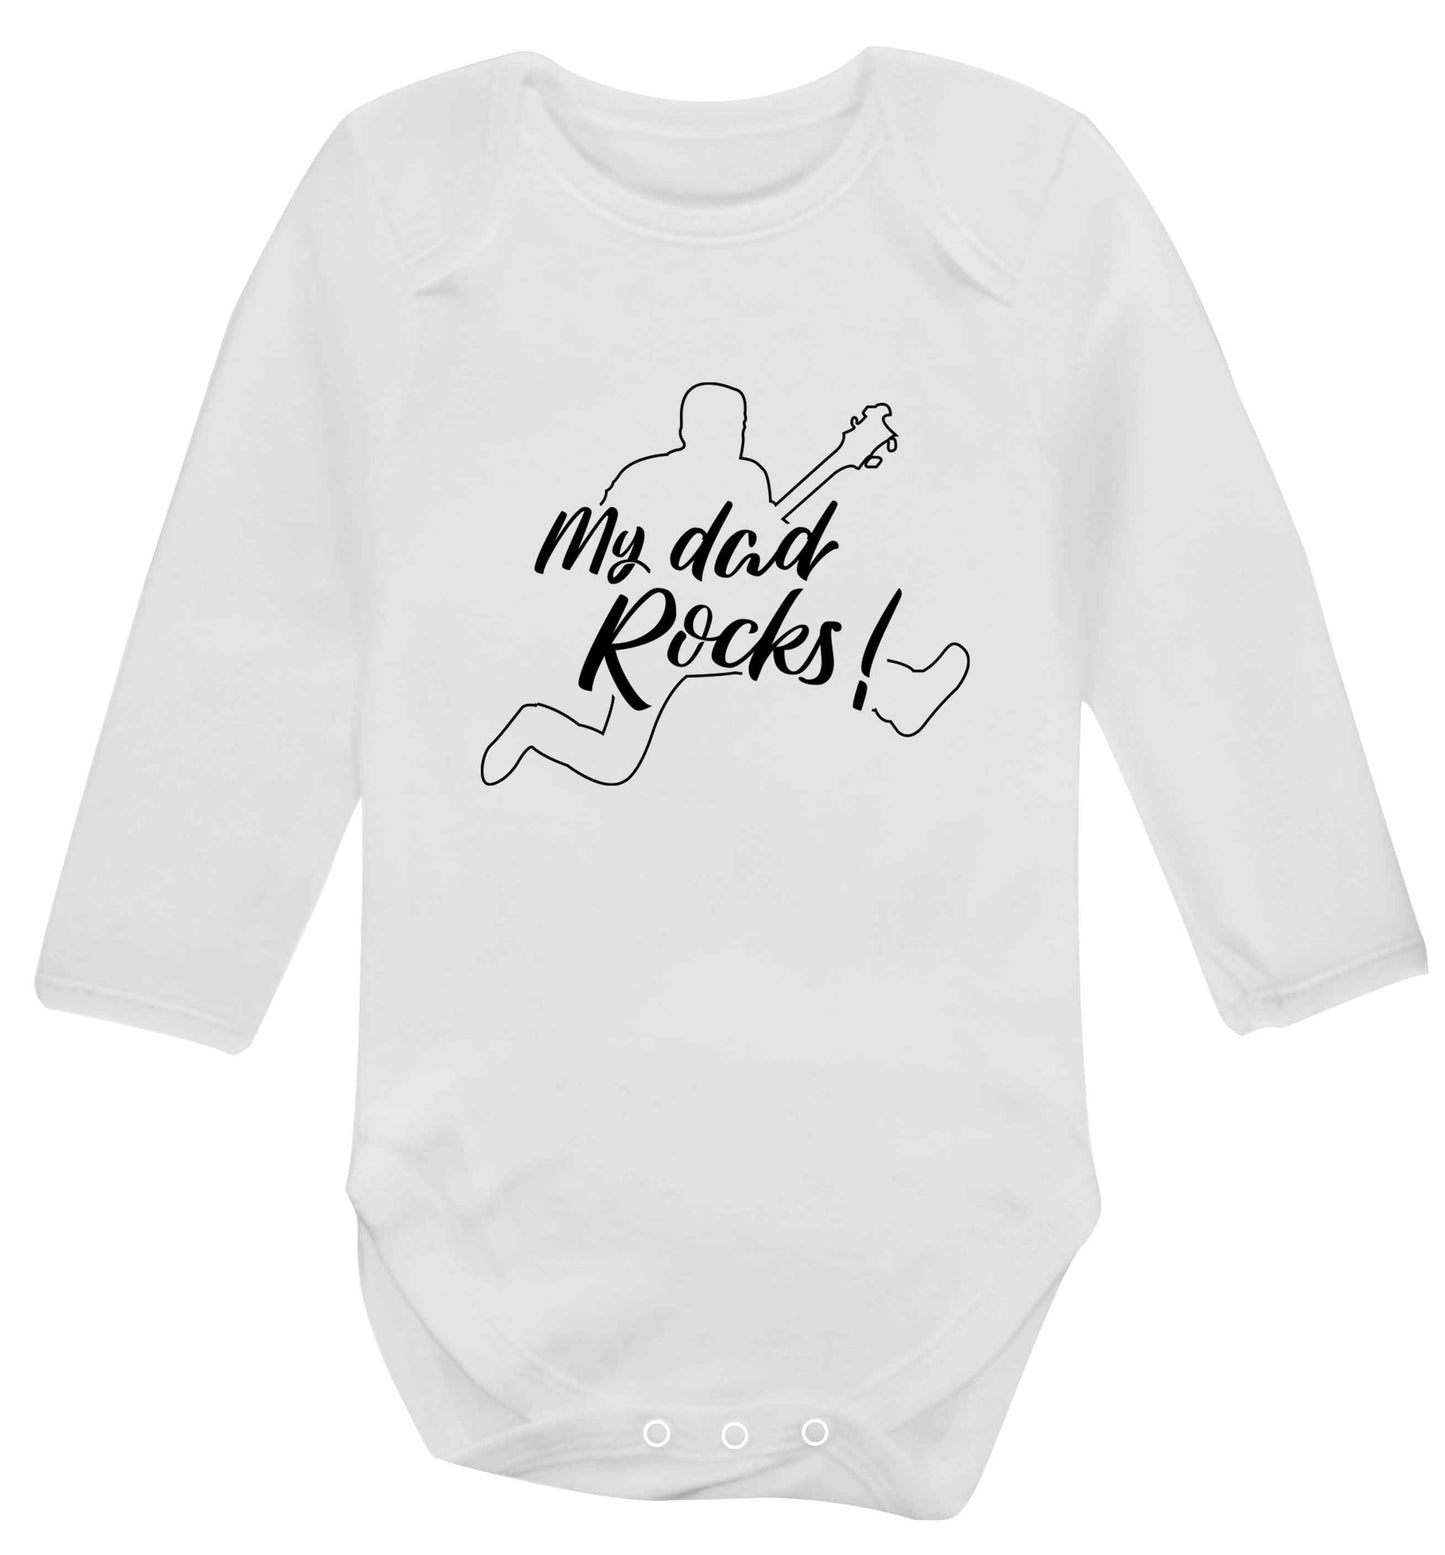 My Dad rocks baby vest long sleeved white 6-12 months